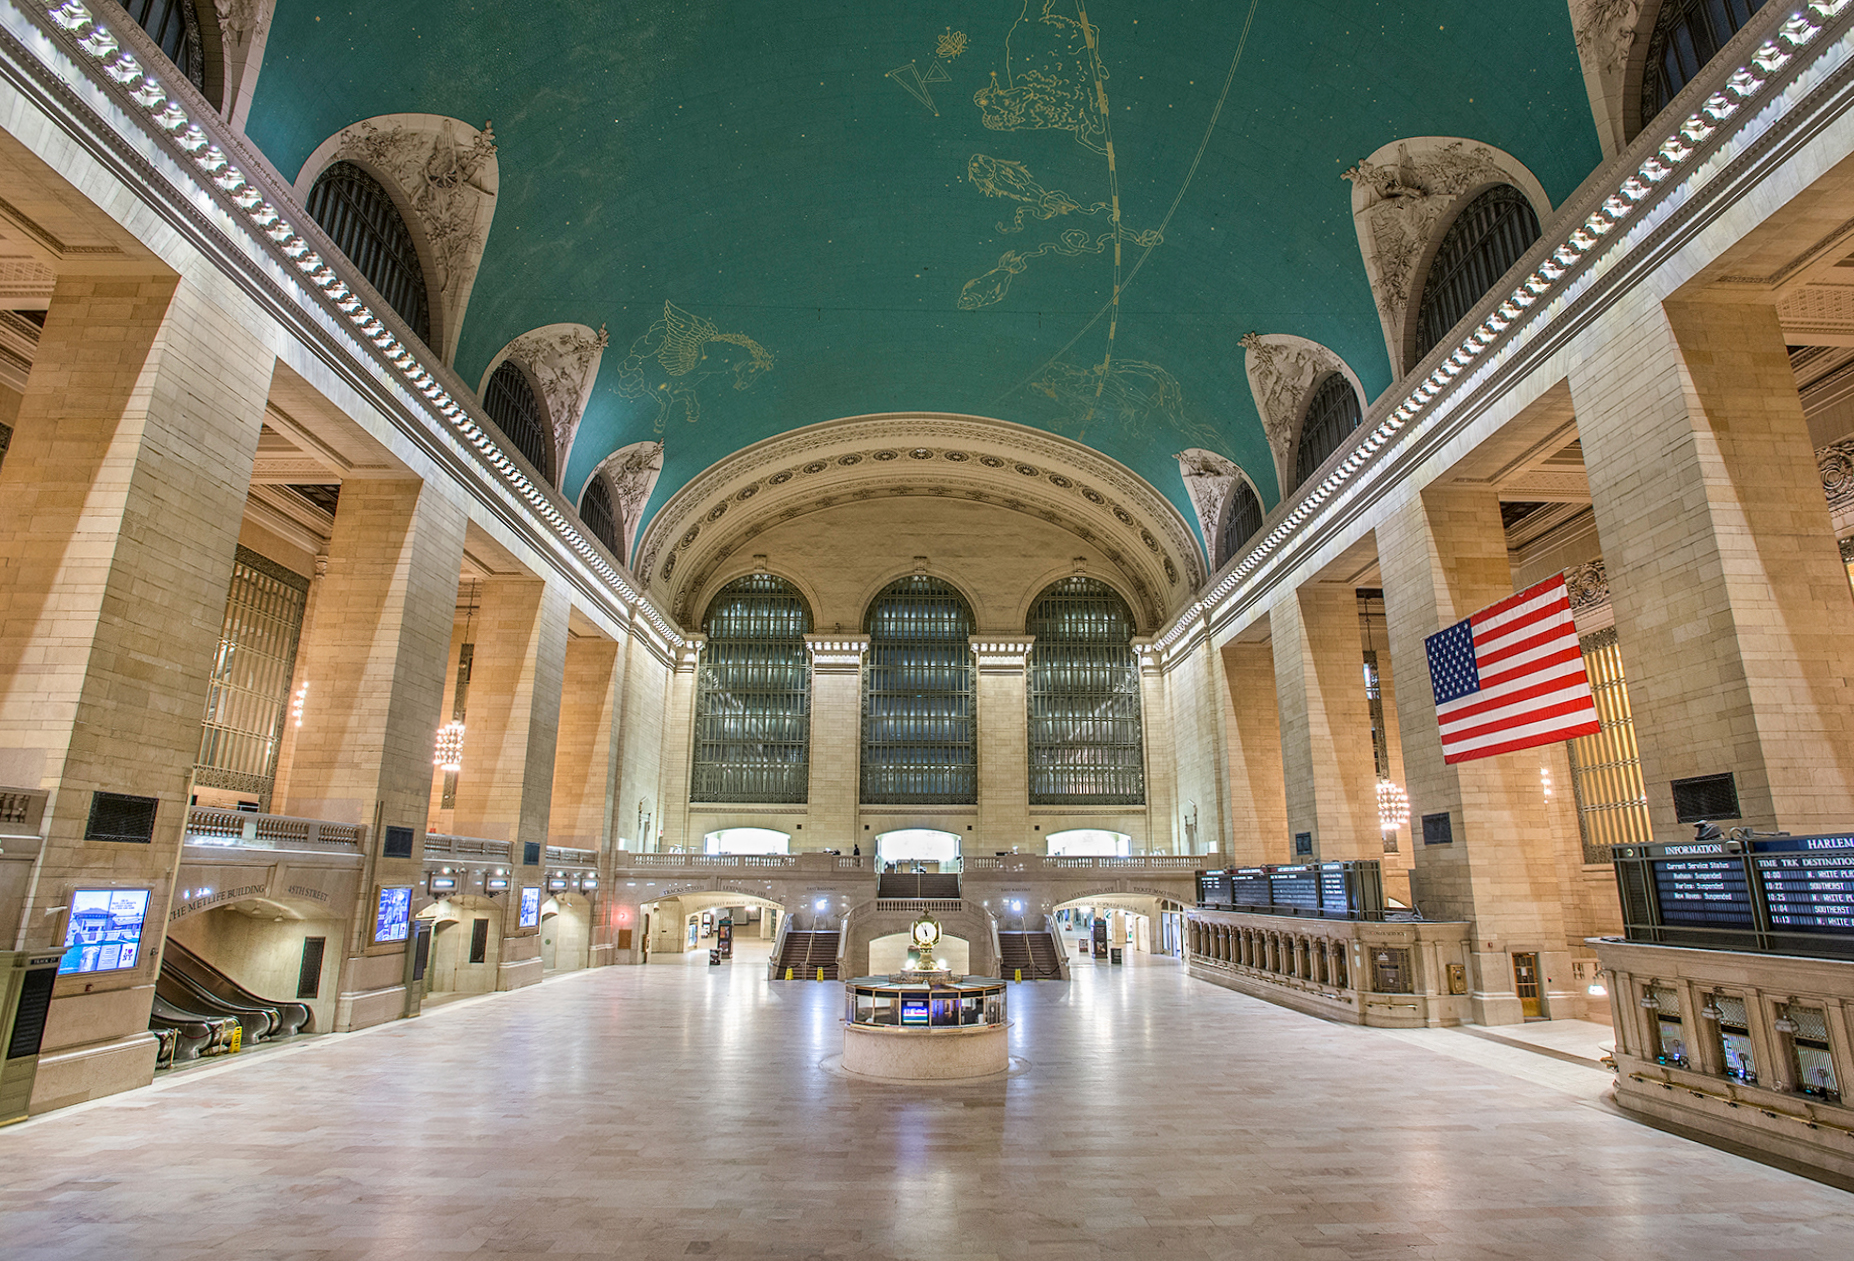 openculture.com - Ayun Halliday - An Immersive, Architectural Tour of New York City's Iconic Grand Central Terminal